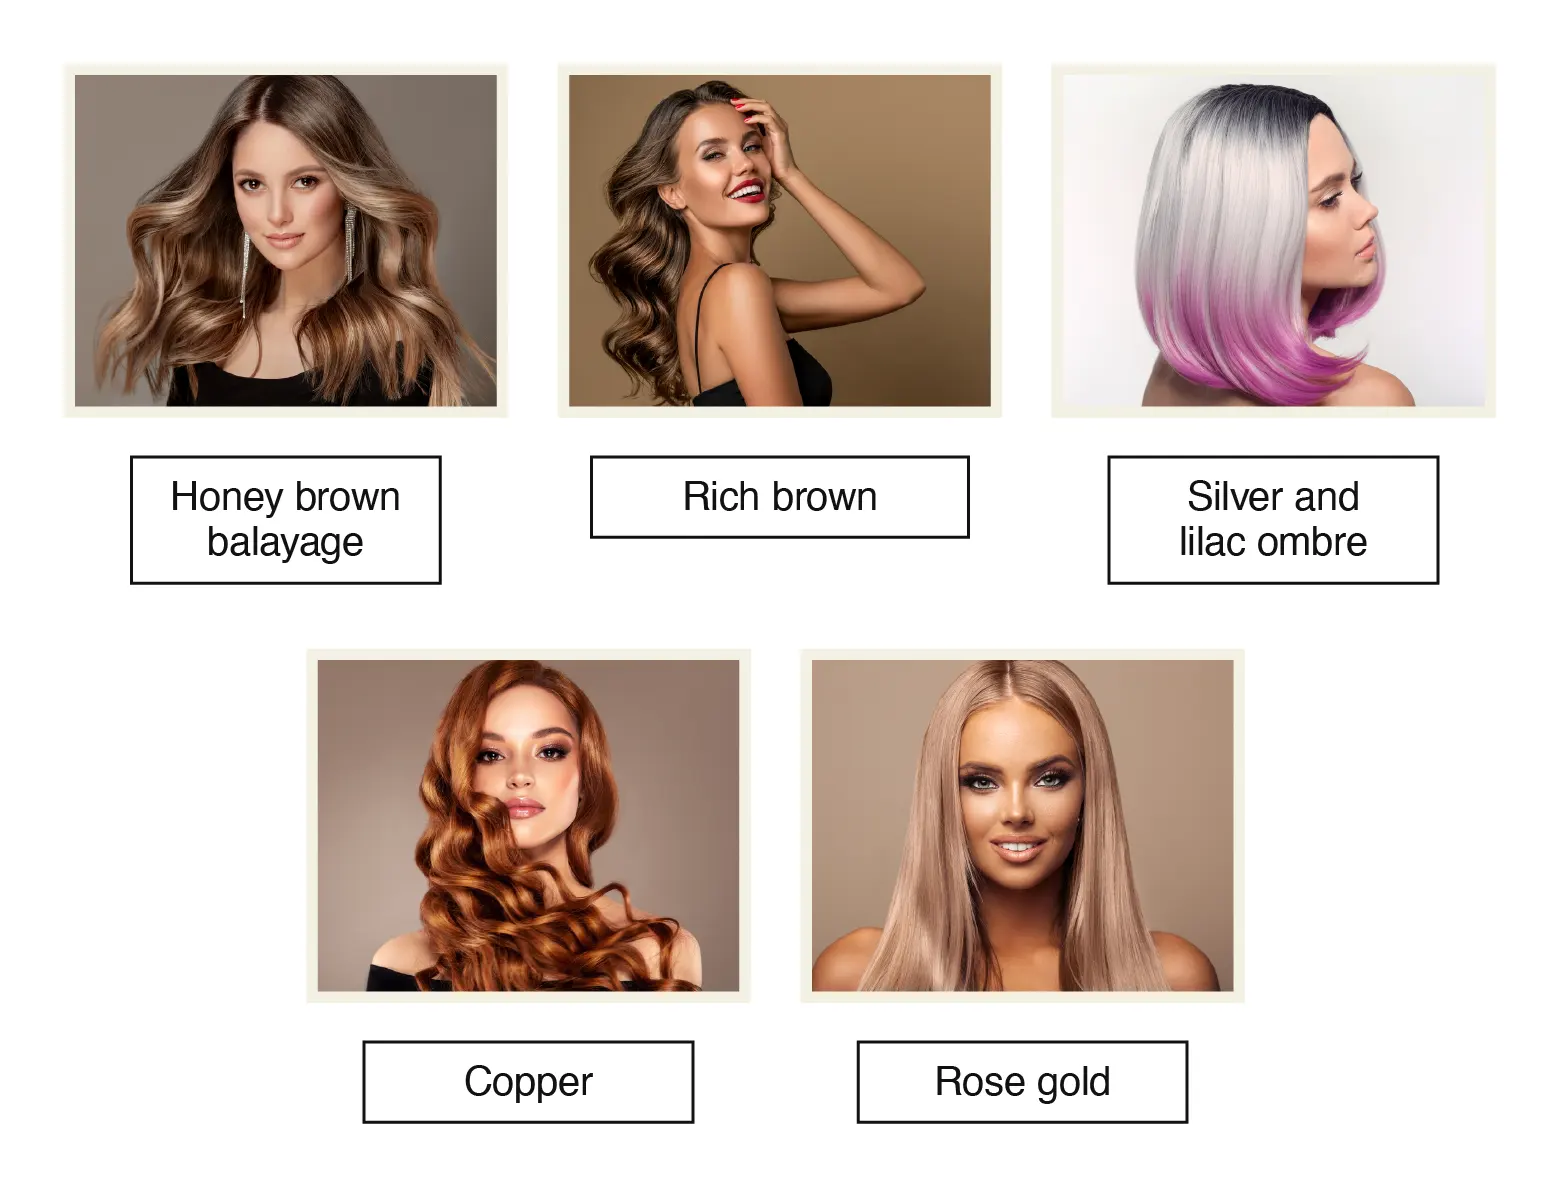 For those with medium skin and neutral undertones, we recommend hair colors like honey brown balayage, rich brown, silver and lilac ombre, copper, and rose gold. 